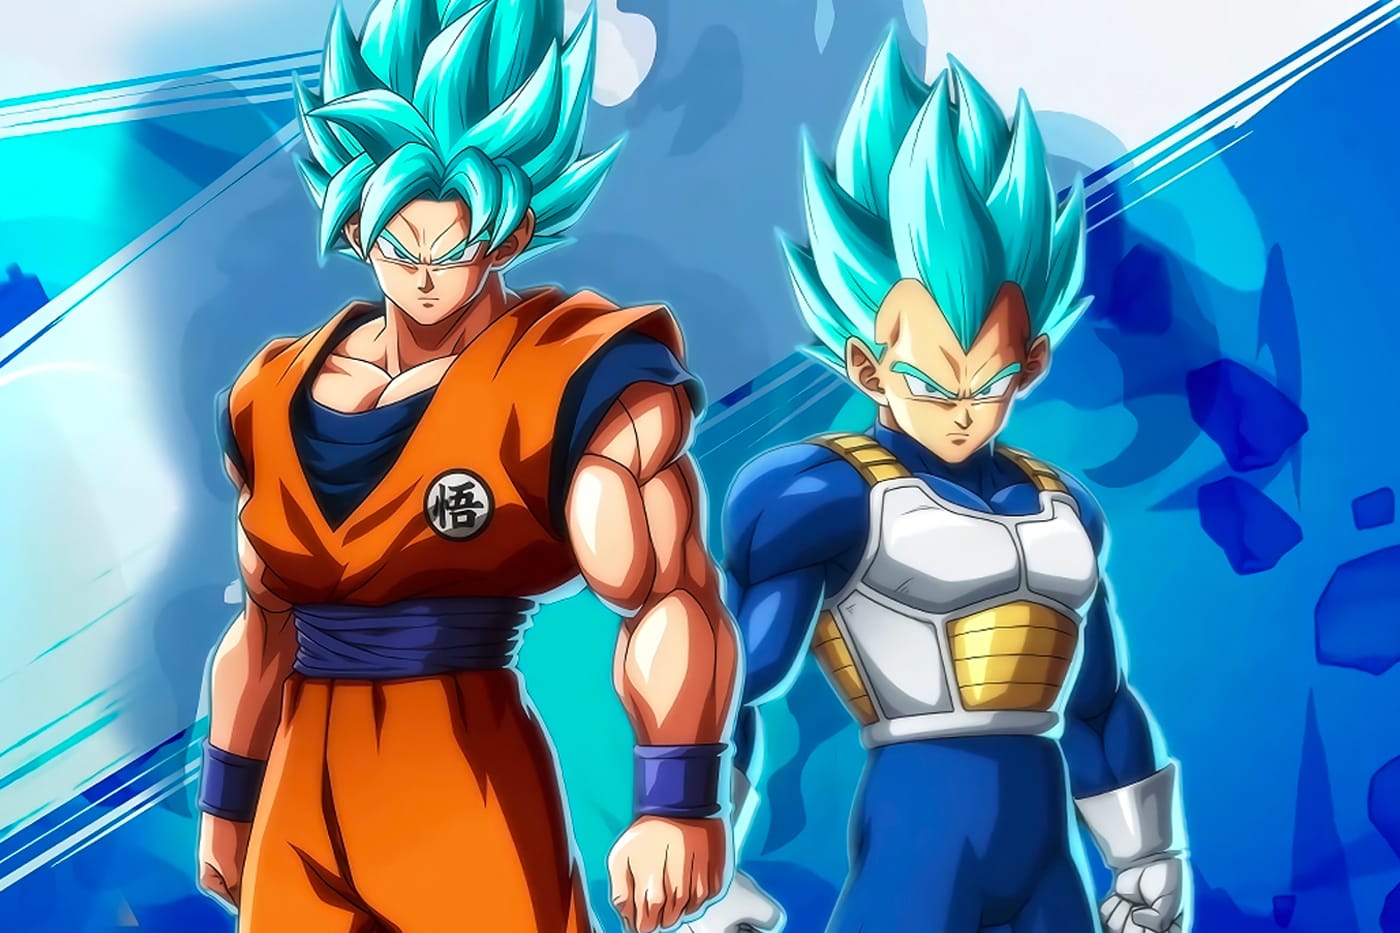 New Dragon Ball Super Episodes Releasing Soon Says New Report